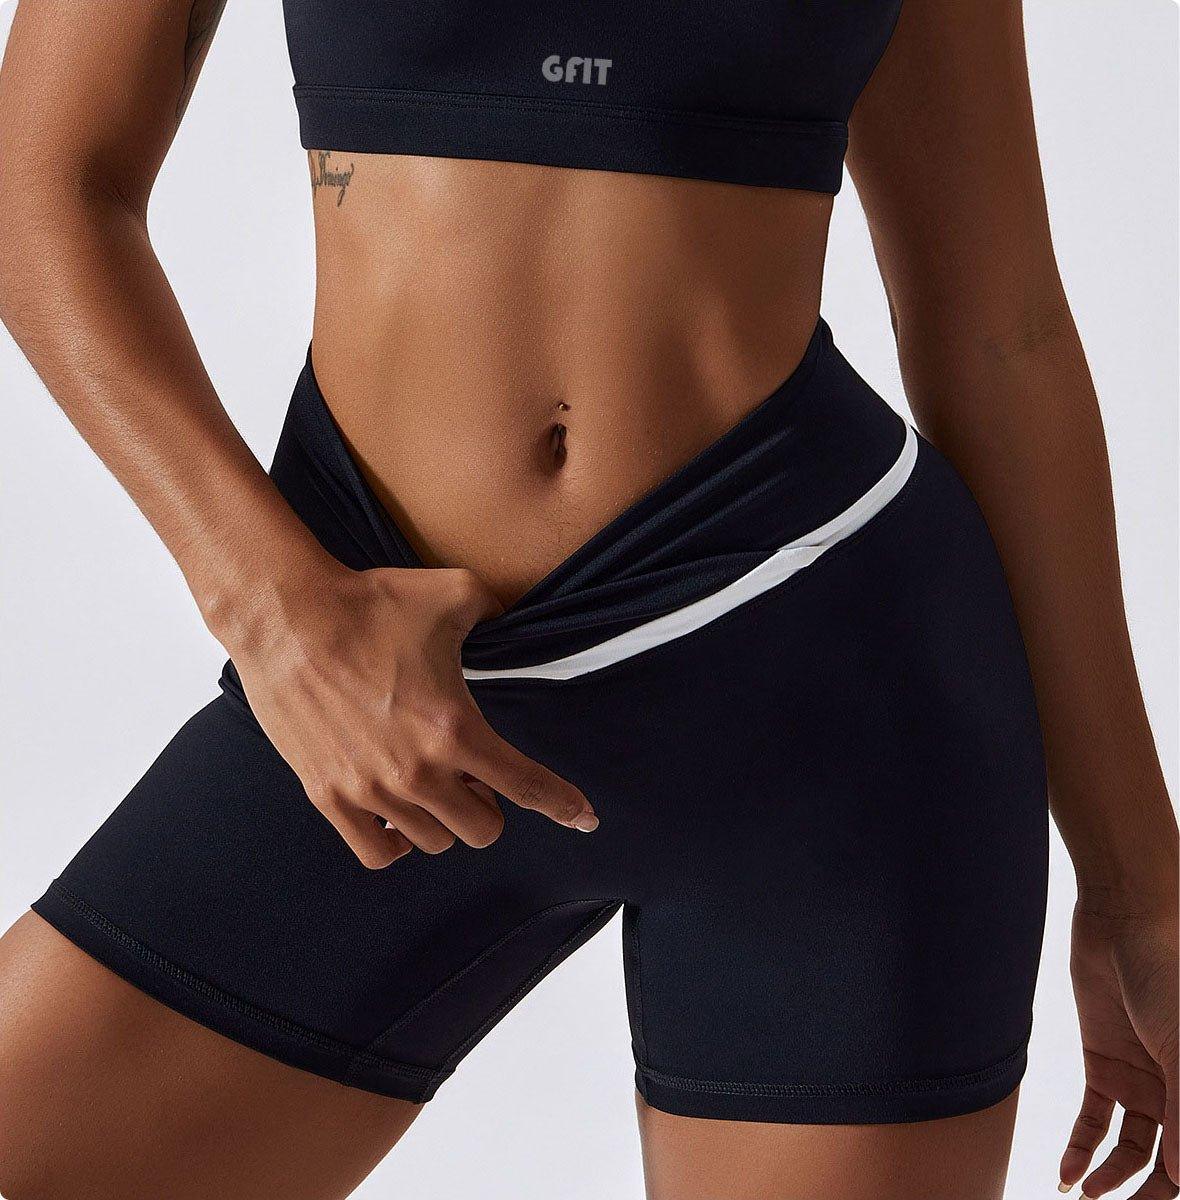 GFIT® Splicing and Contrasting colors Gym Set For Women - GFIT SPORTS